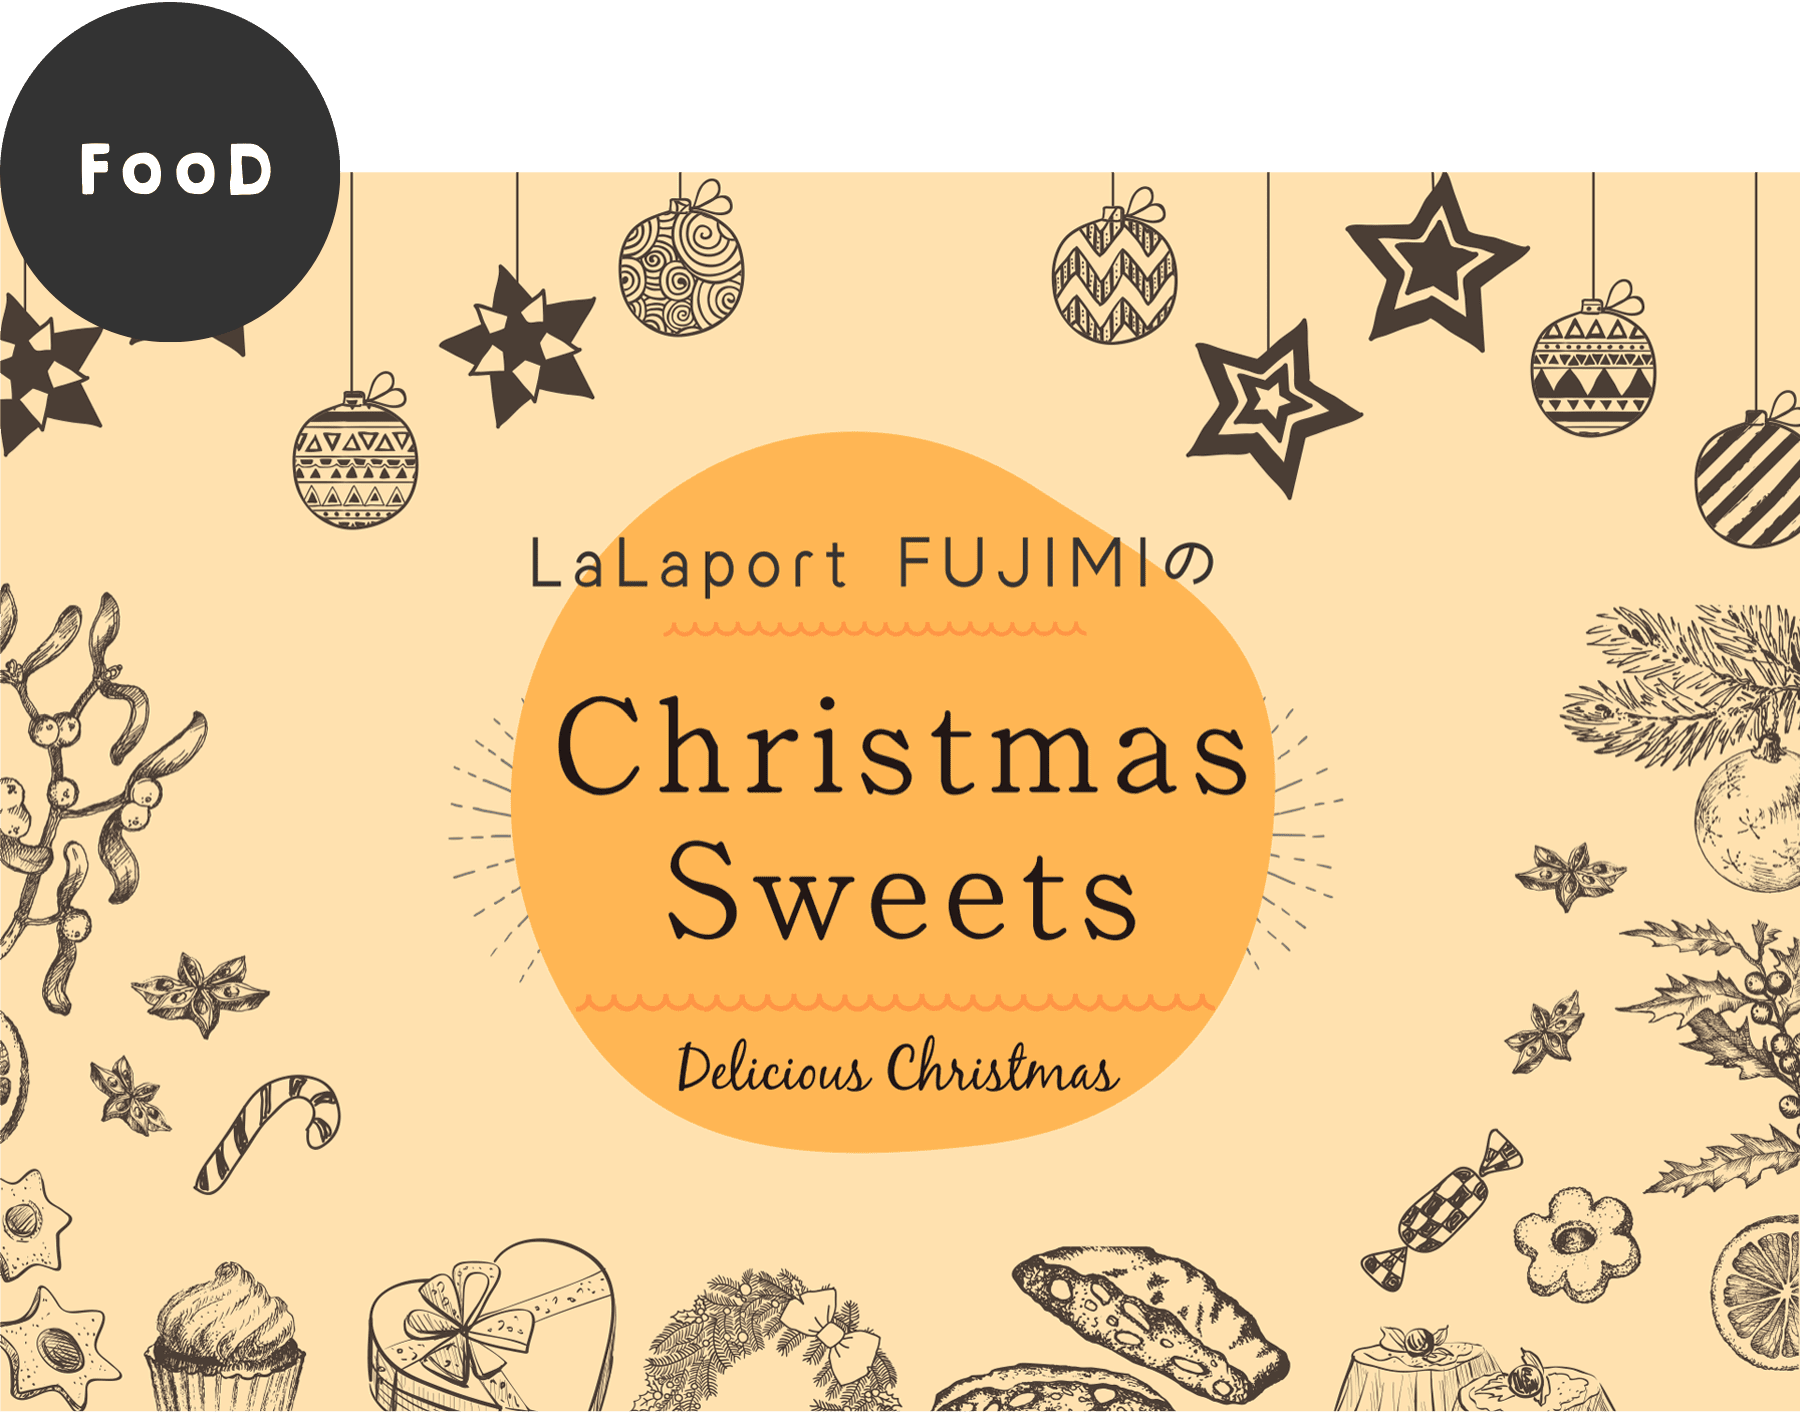 FooD：LaLaport FUJIMIのChristmas Sweets Delicious Christmas